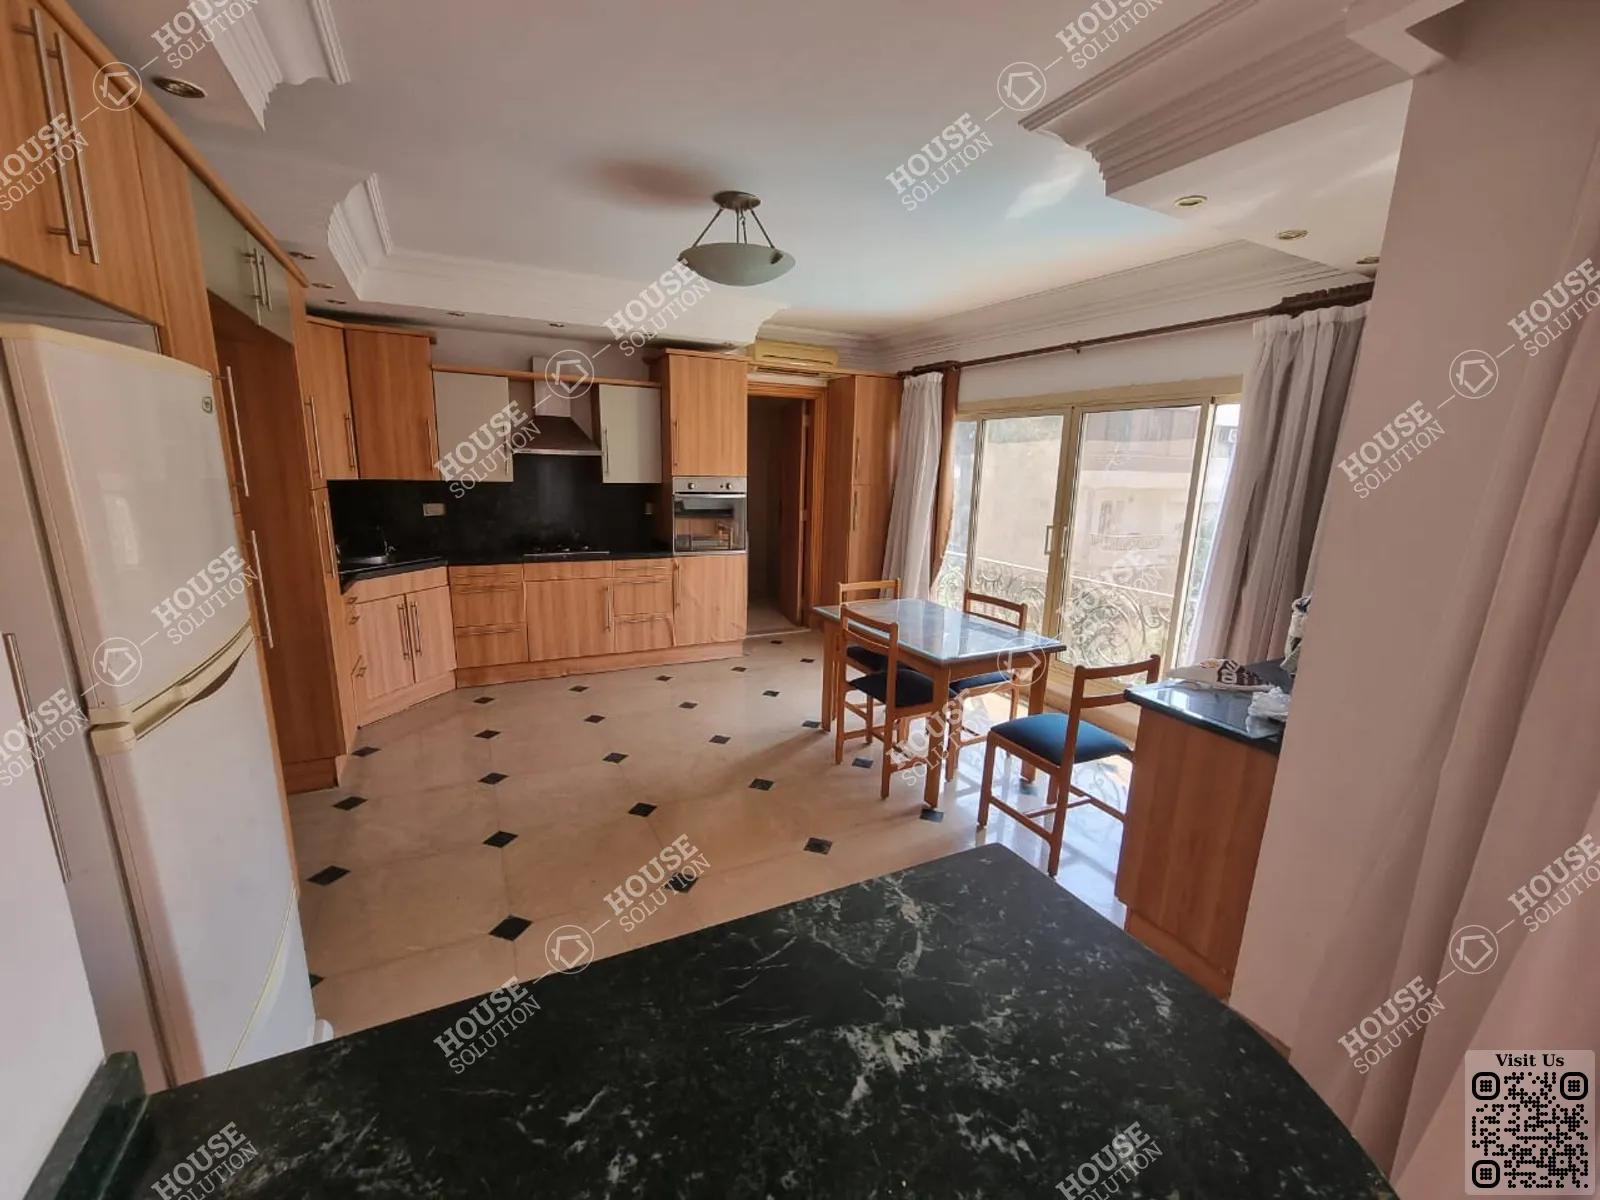 KITCHEN  @ Apartments For Rent In Maadi Maadi Sarayat Area: 265 m² consists of 4 Bedrooms 4 Bathrooms Furnished 5 stars #4234-2